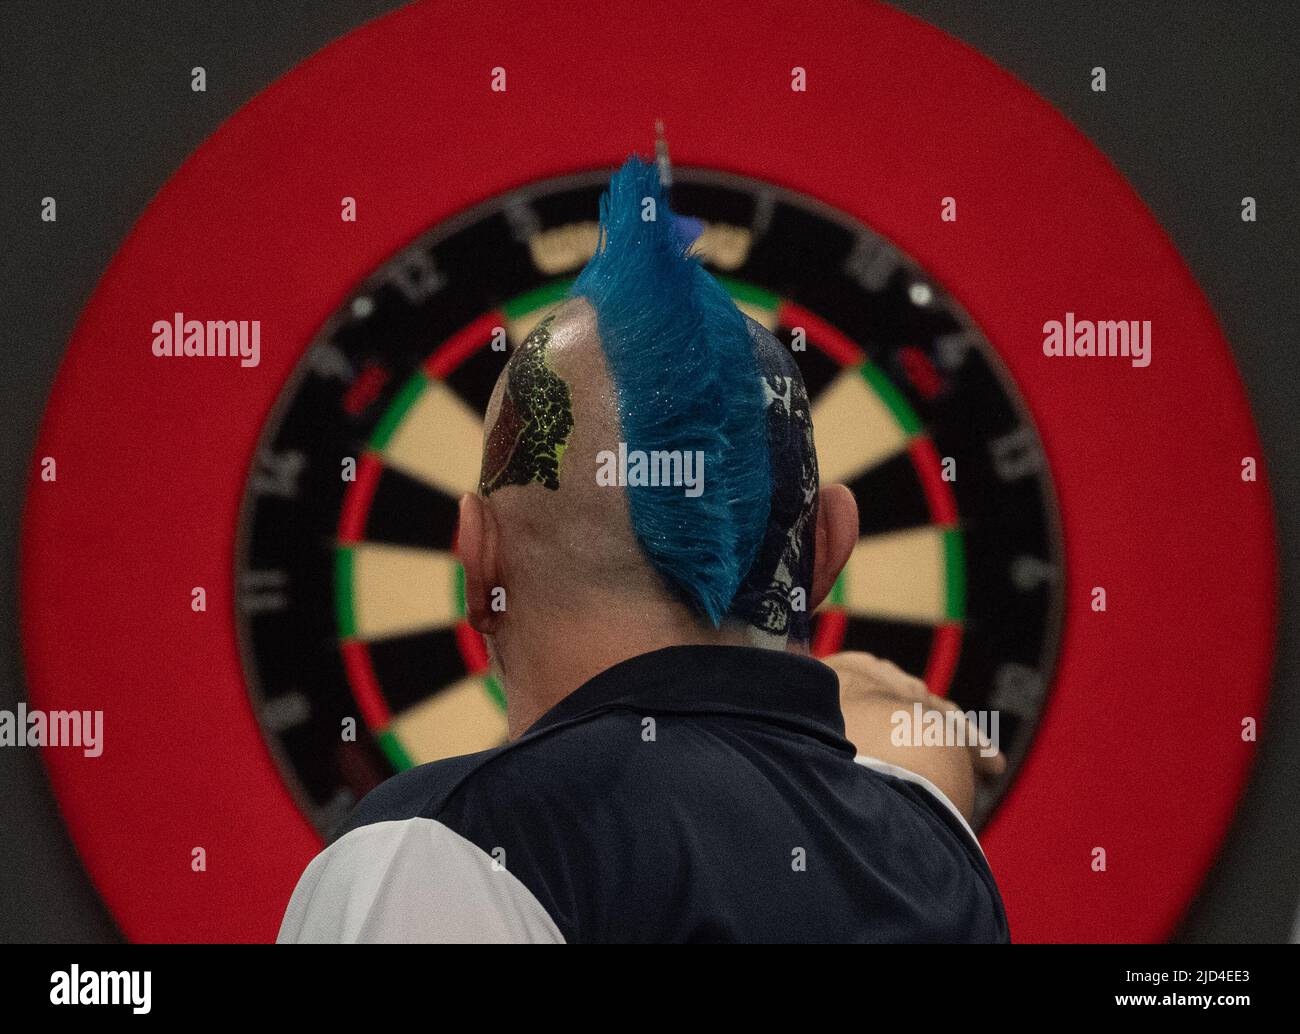 Pdc world darts championship hi-res stock photography and images - Alamy